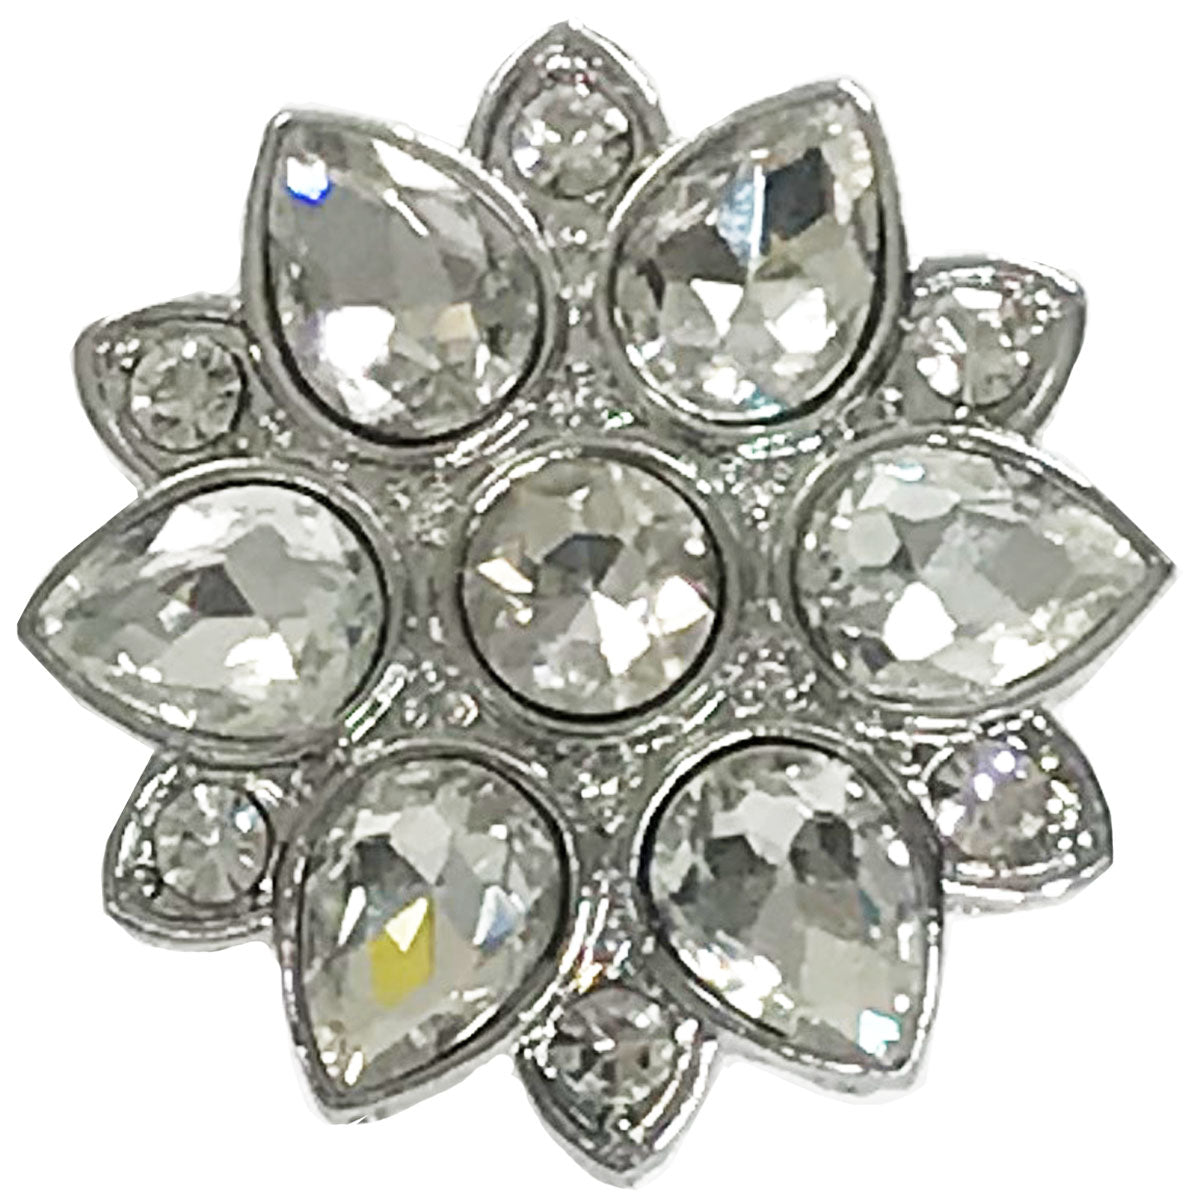 Crystal studded cluster. Magnetic Brooch for Scarves Artistic Sculptural shapes add a personality to absolutely anything you wish to put your stamp on! The Super Strong Magnet is enough for a jacket lapel! Use to hold a sarong or cardigan together.  Great to adorn a hat or to hold a scarf in place with Fabric Safe Magnet.